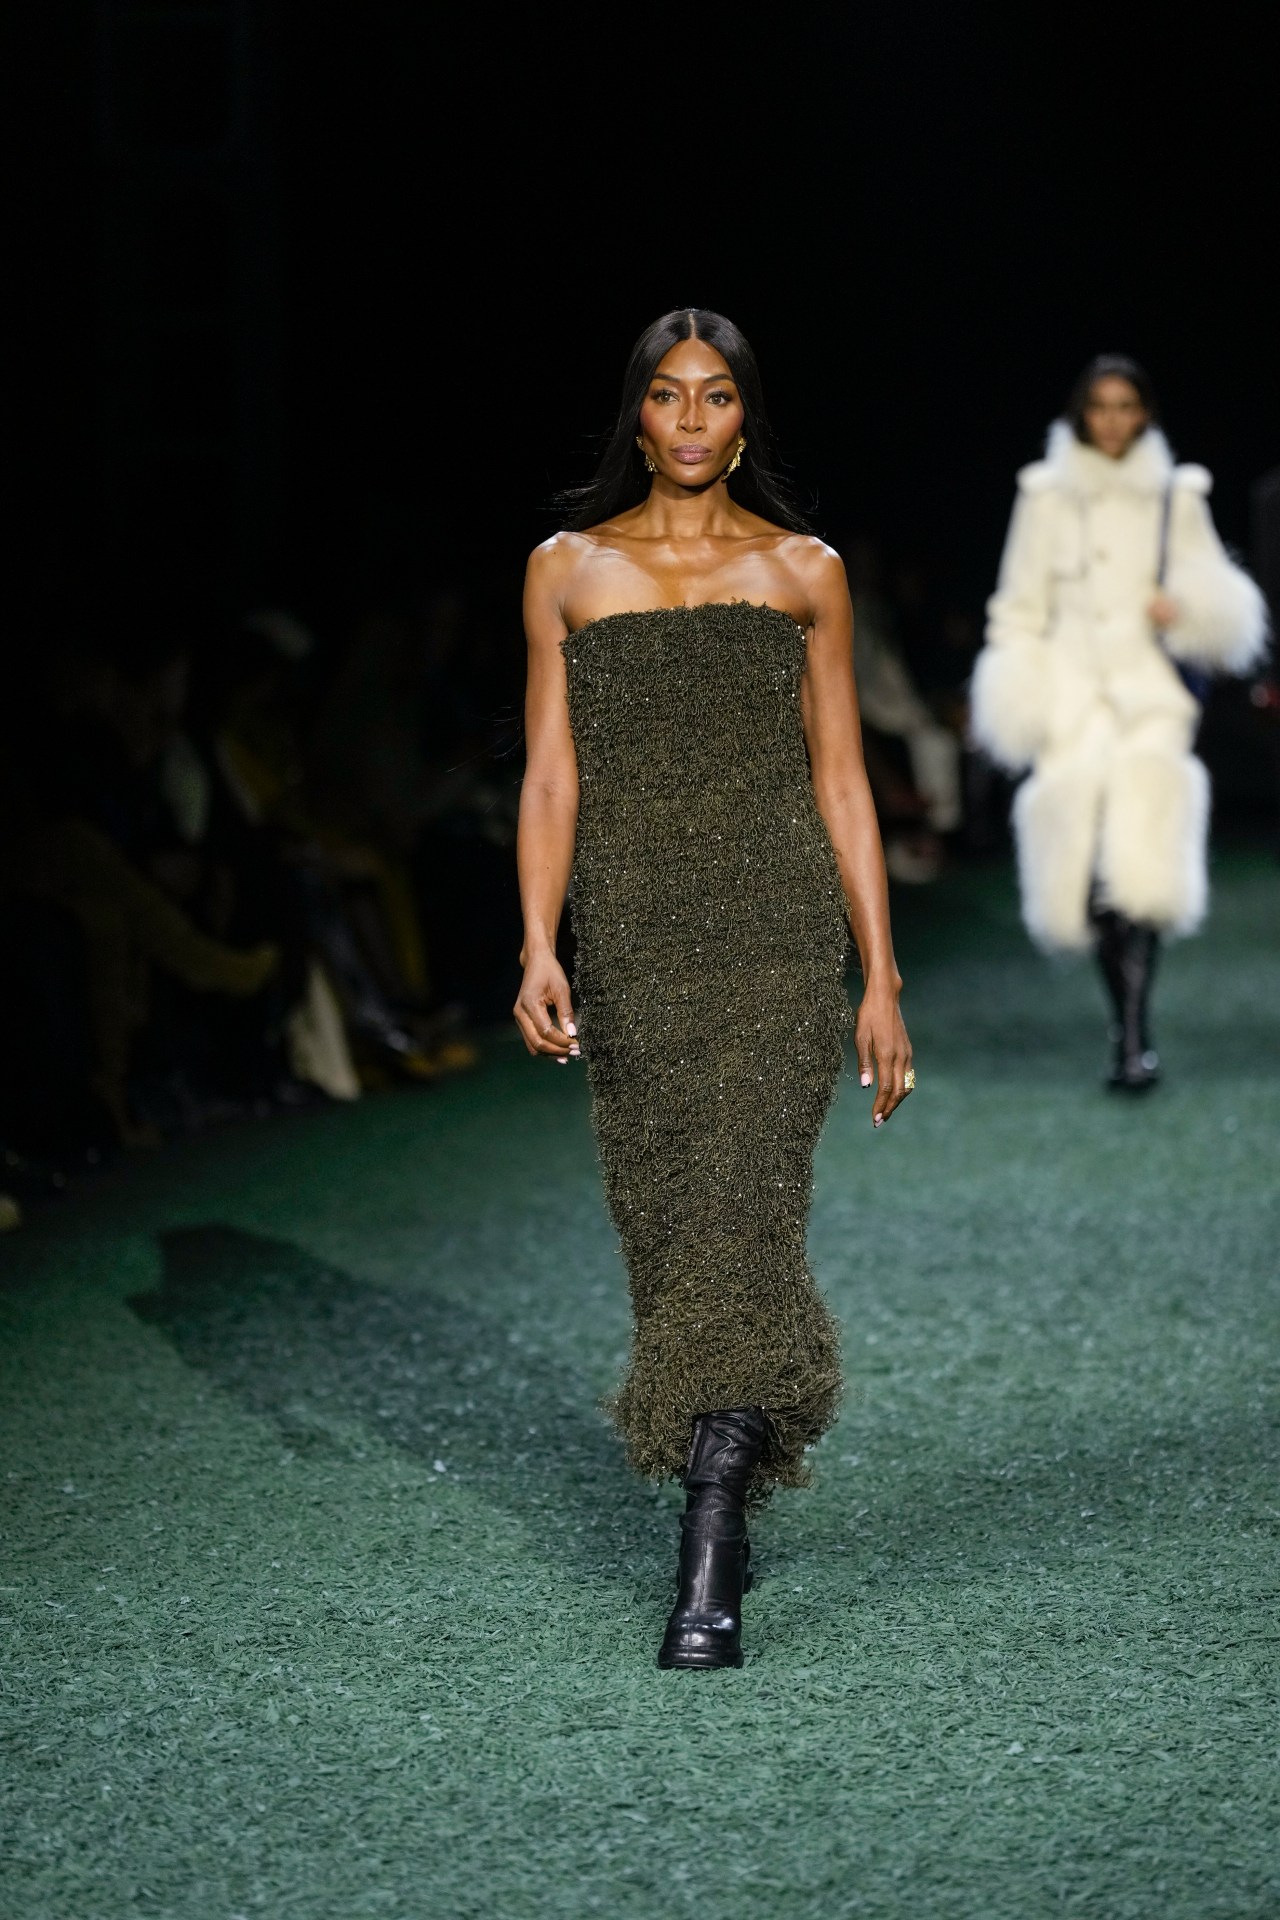 Naomi Campbell walks for star-studded Burberry show at London Fashion Week